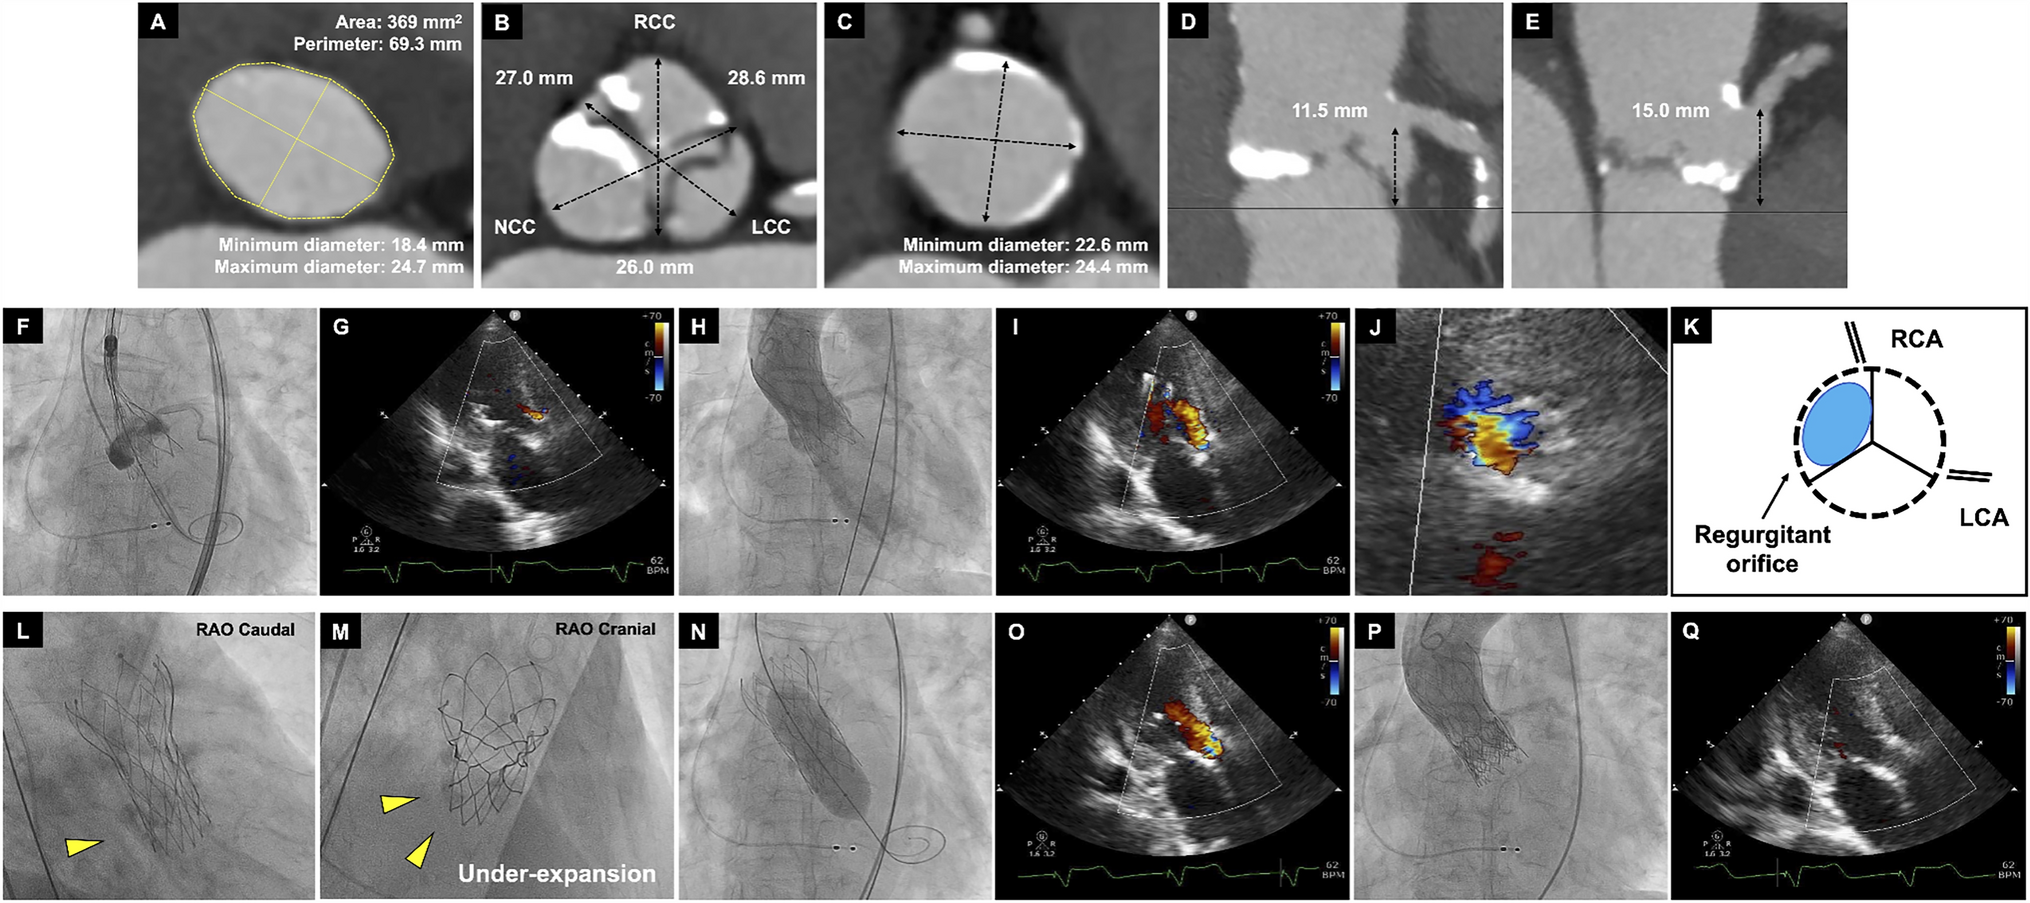 Acute leaflet malfunction of Navitor valve with severe intraprosthetic aortic insufficiency immediately after implantation